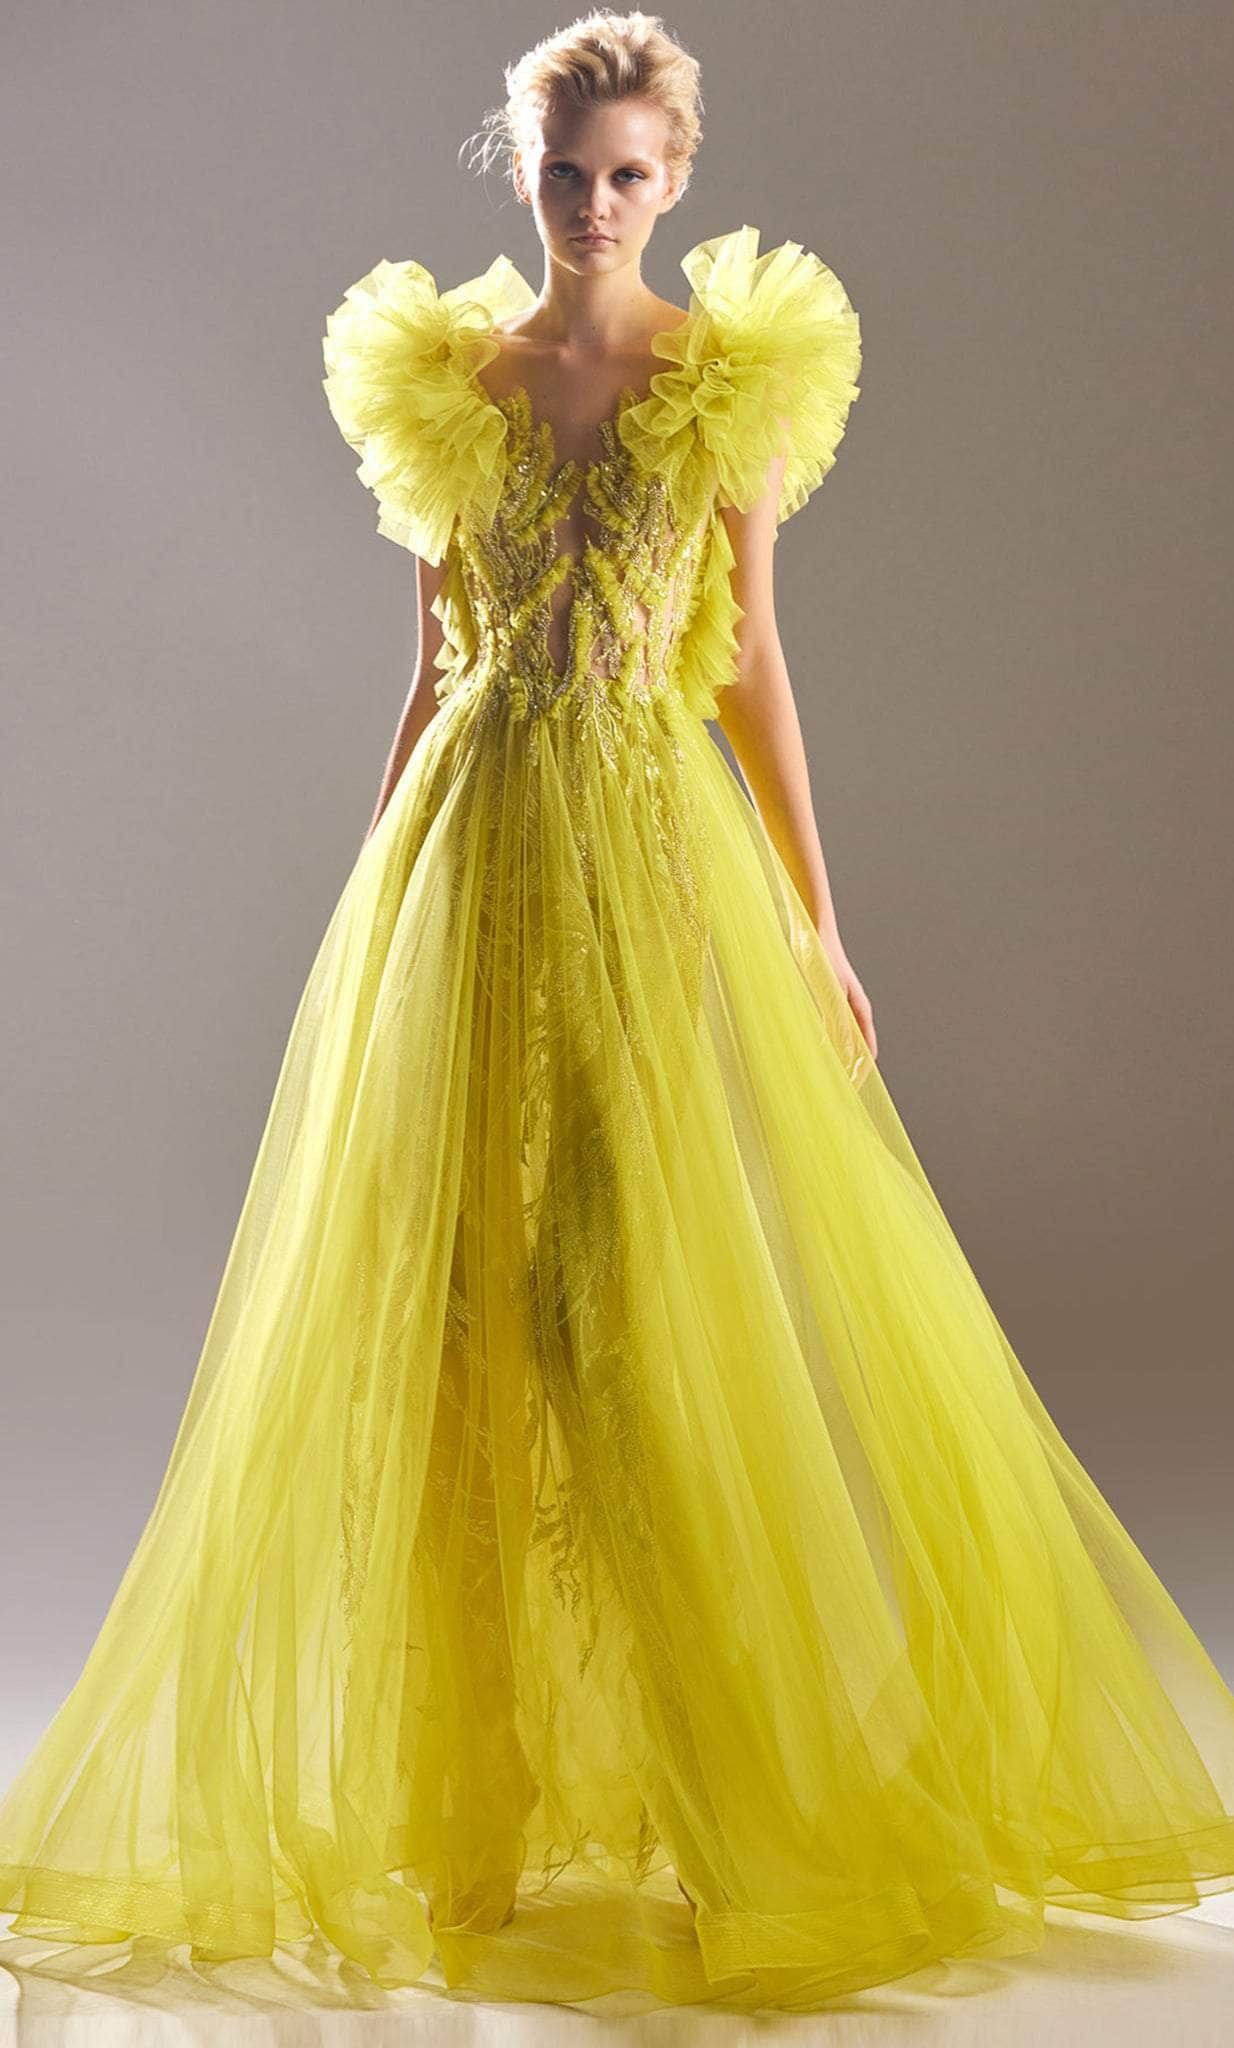 MNM COUTURE G1515 - Illusion Bateau Embellished Evening Dress Formal Gown 0 / Lime